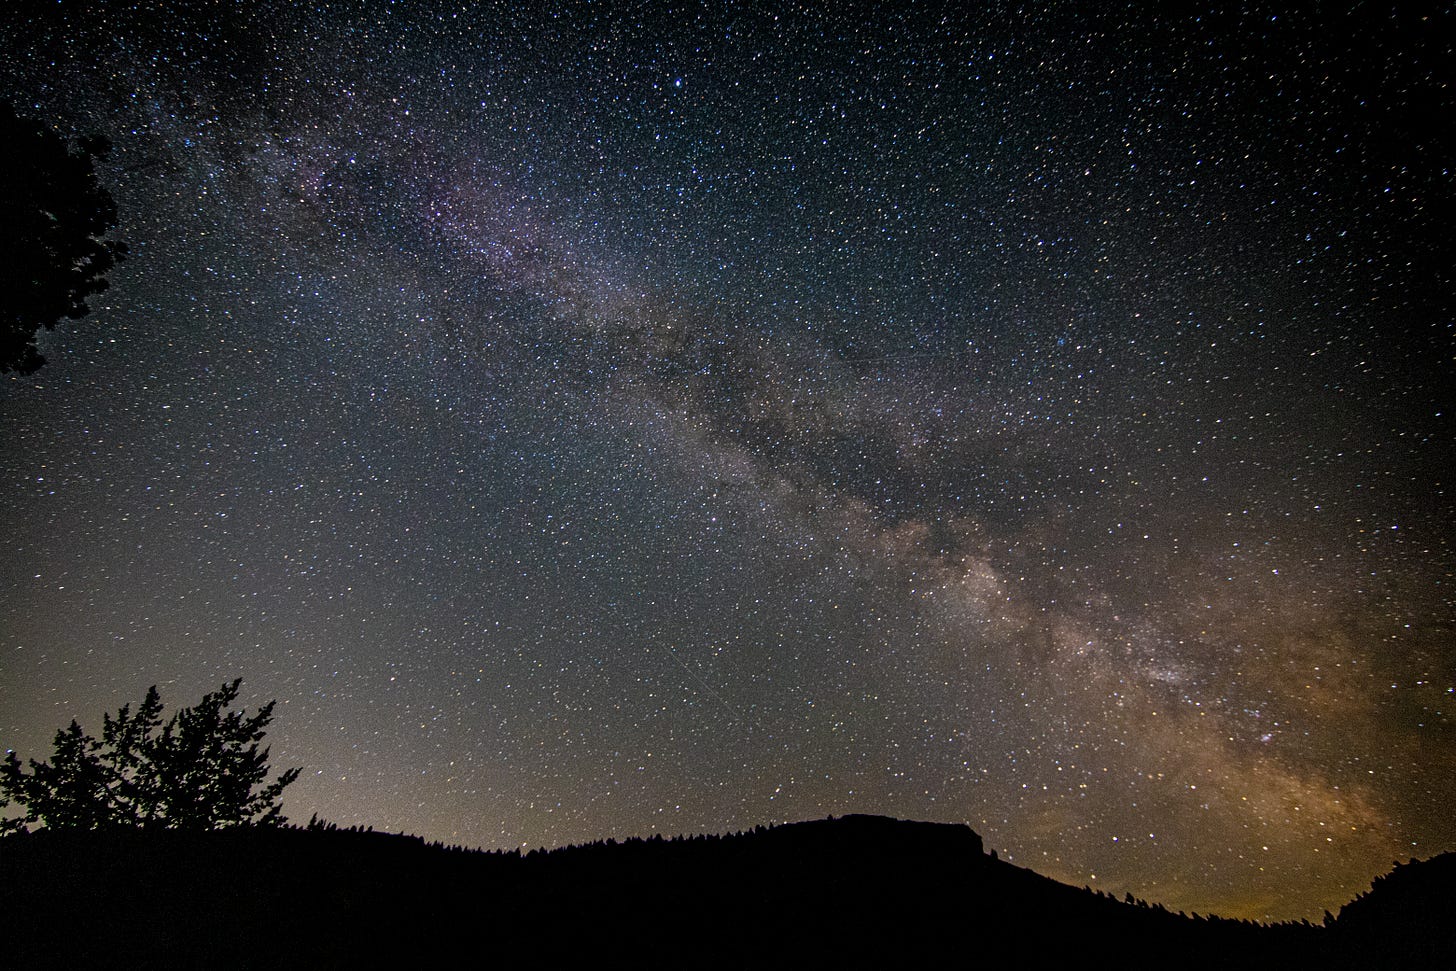 Milky Way sky with a slightly mountainous foreground